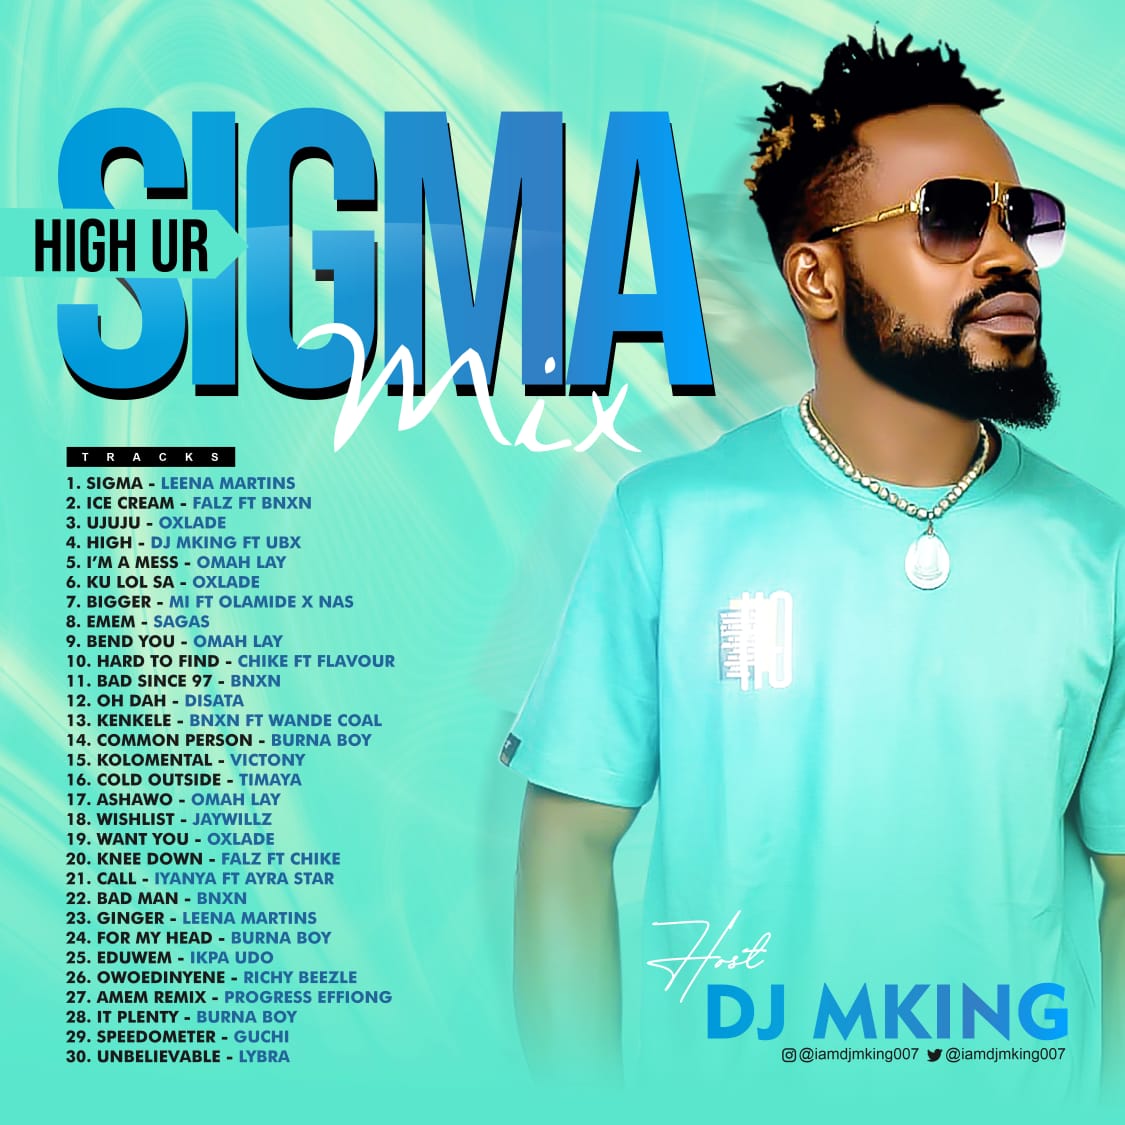 DOWNLOAD MIXTAPE: HIGH UR SIGMA HOSTED BY DJ MKING